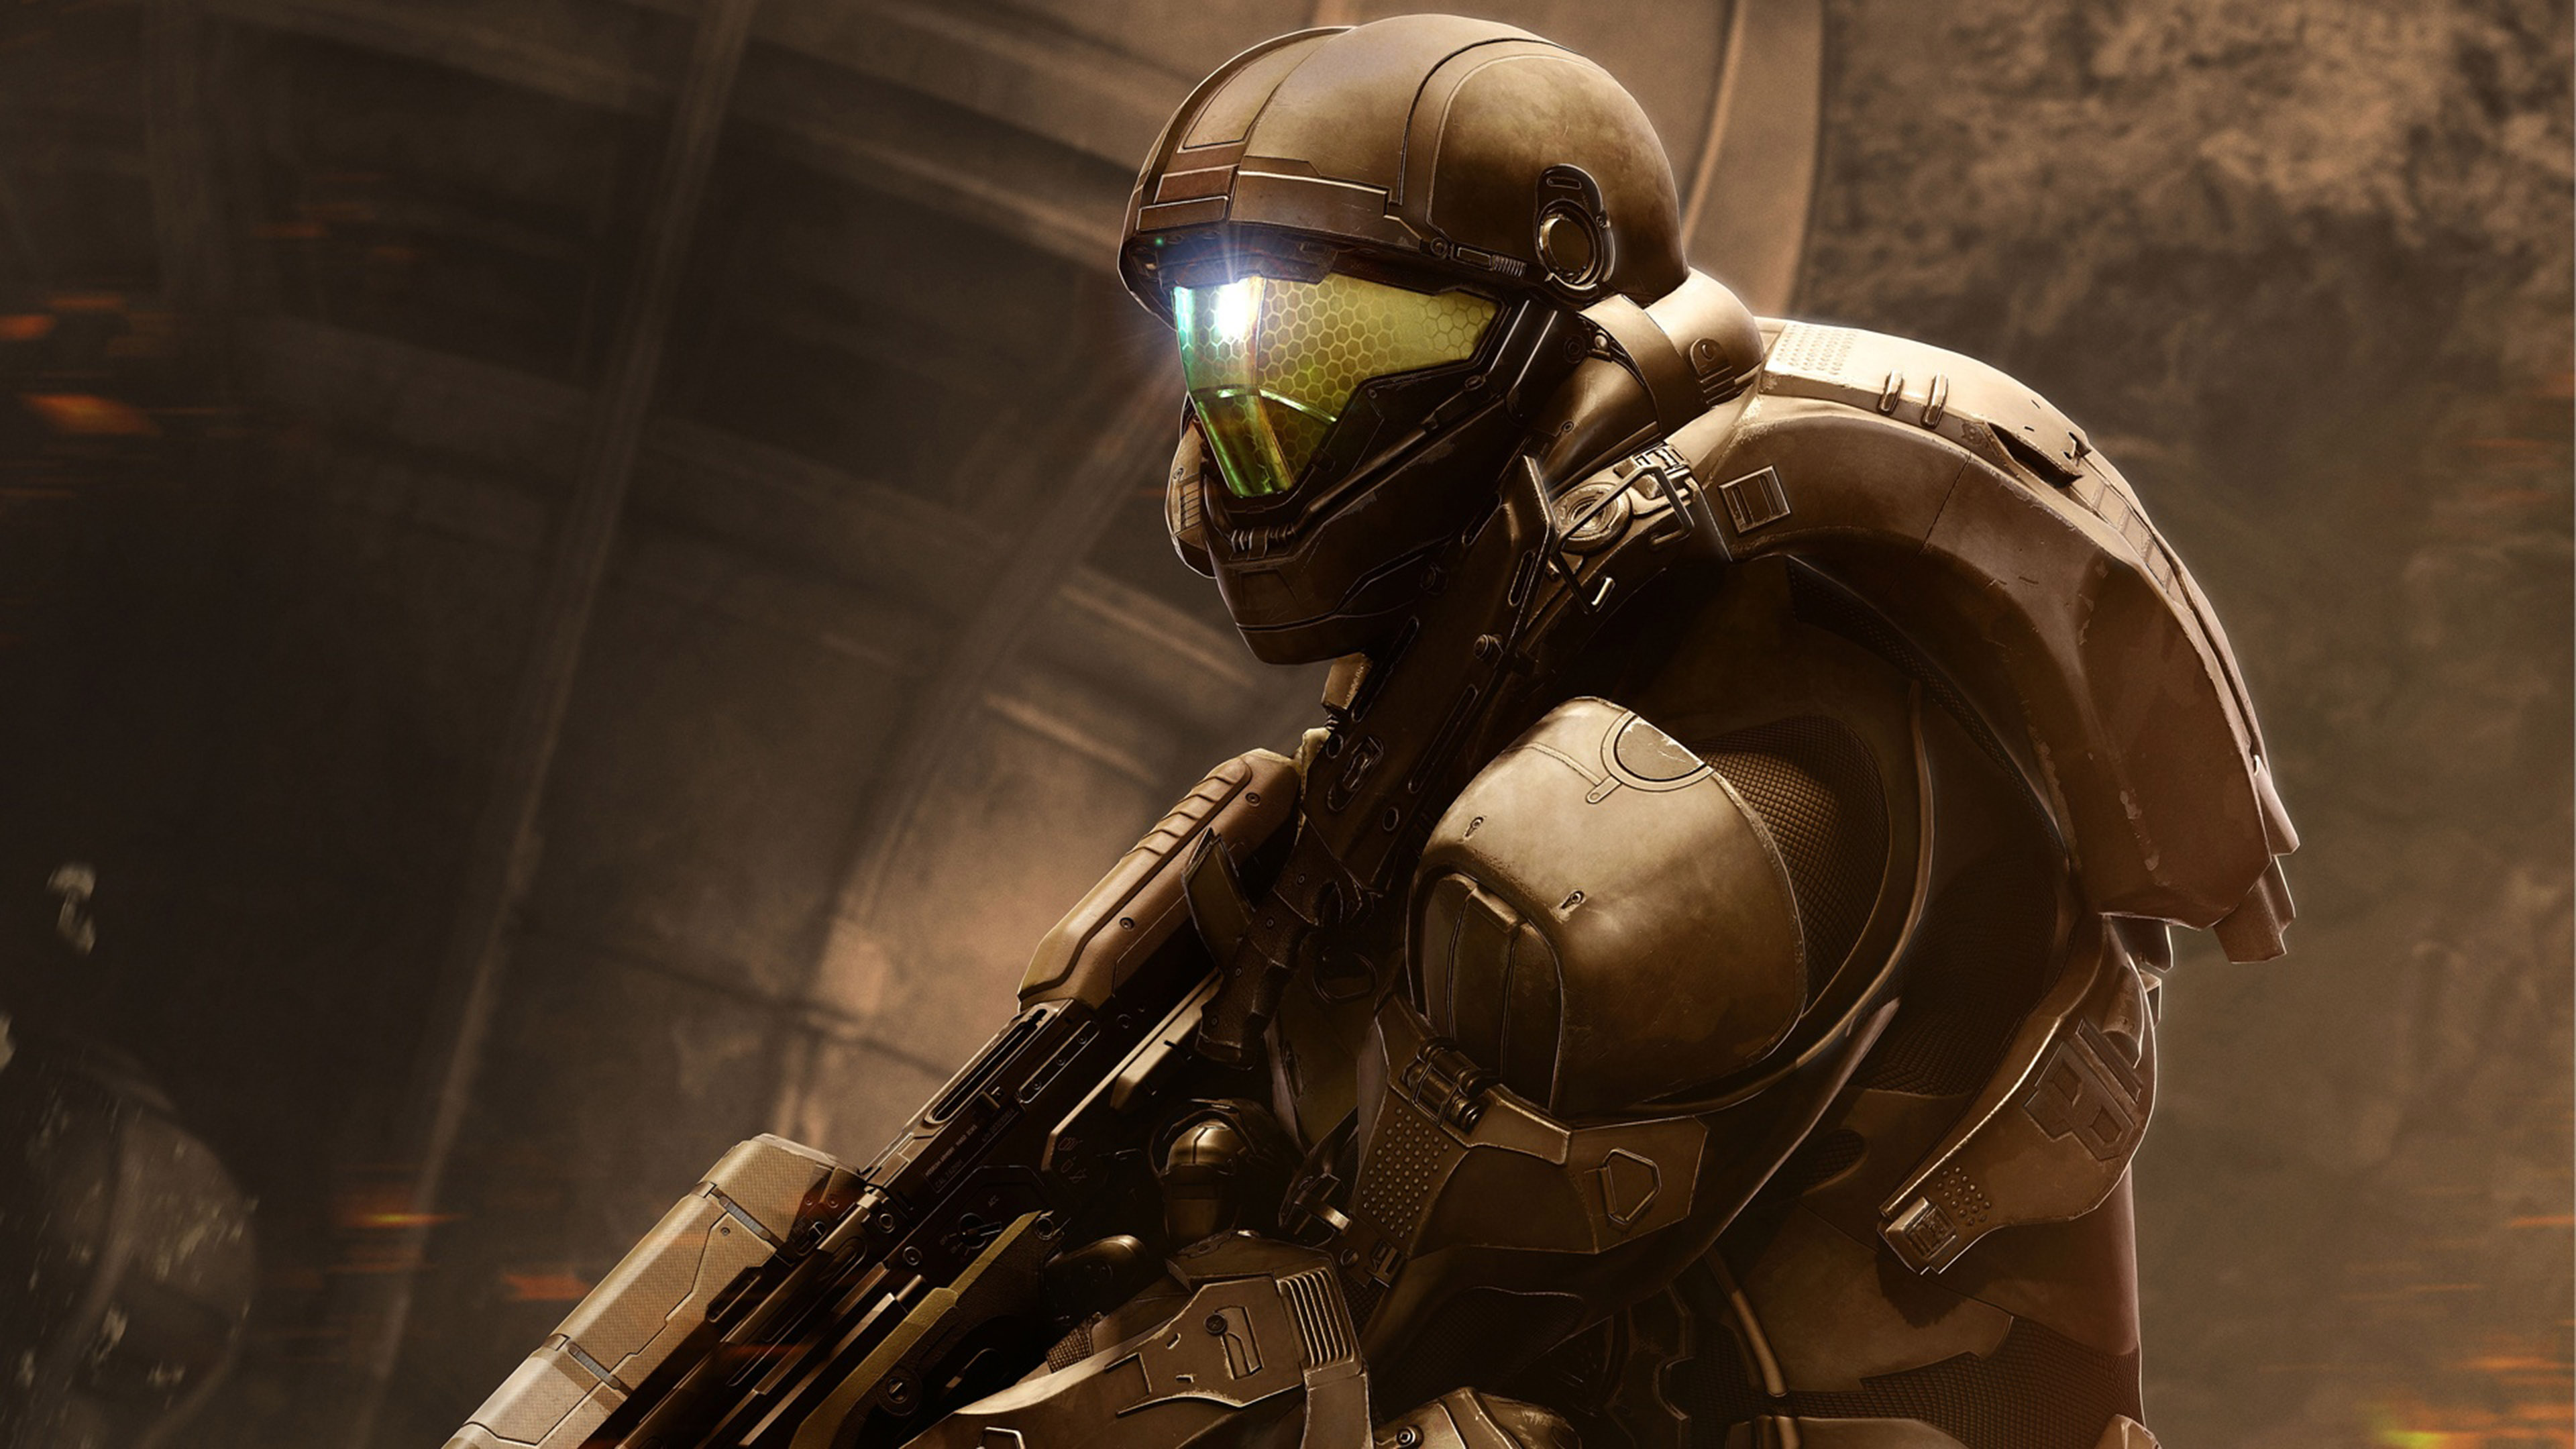 Free download HD Background Halo 5 Guardians Game Buck Shooter Robot